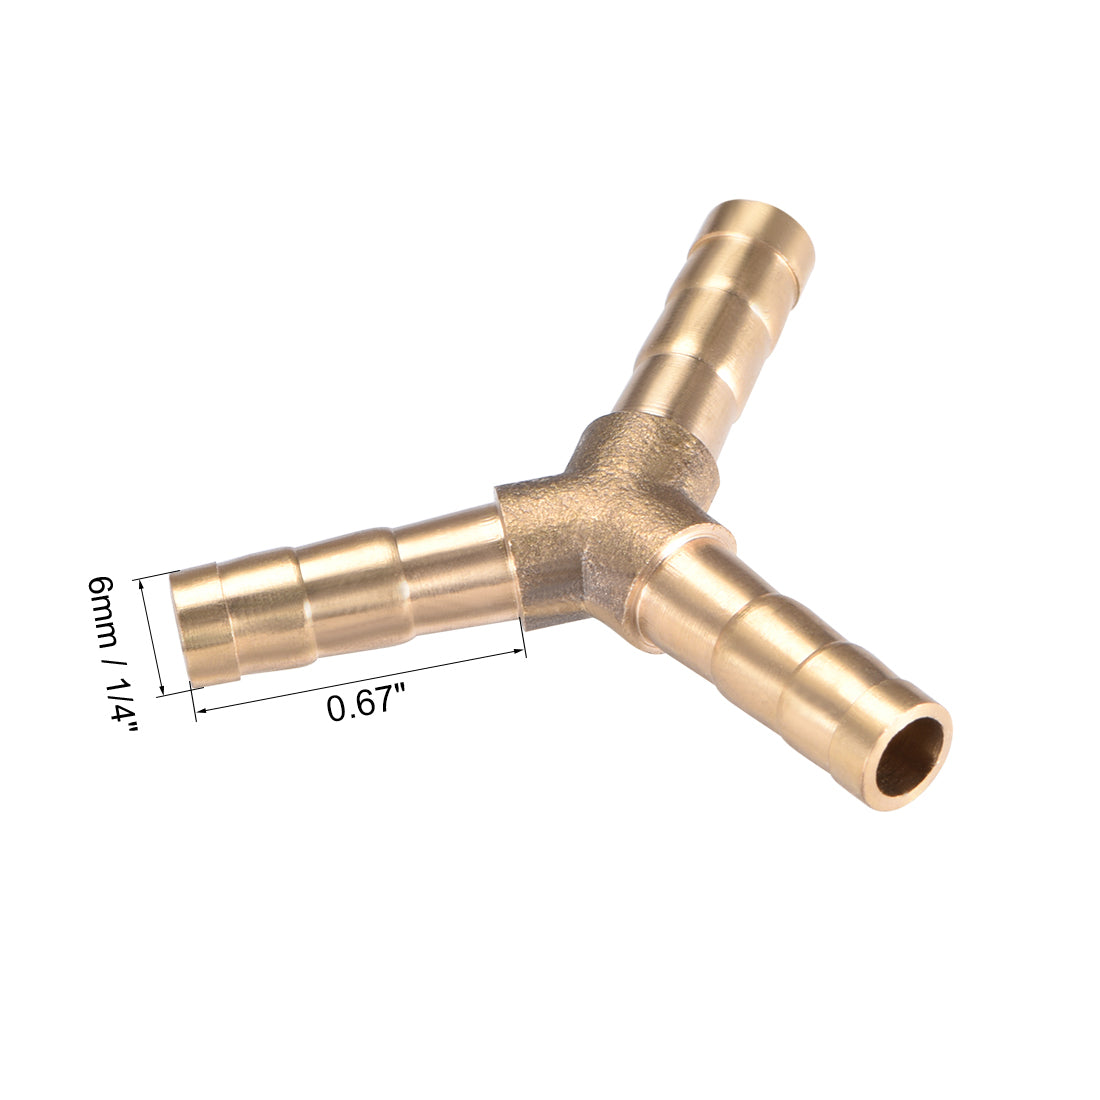 Uxcell Uxcell 12mm or 1/2" ID Brass Barb Splicer Fitting,Y-Shaped 3Way,Barb Hose Fitting,2pcs